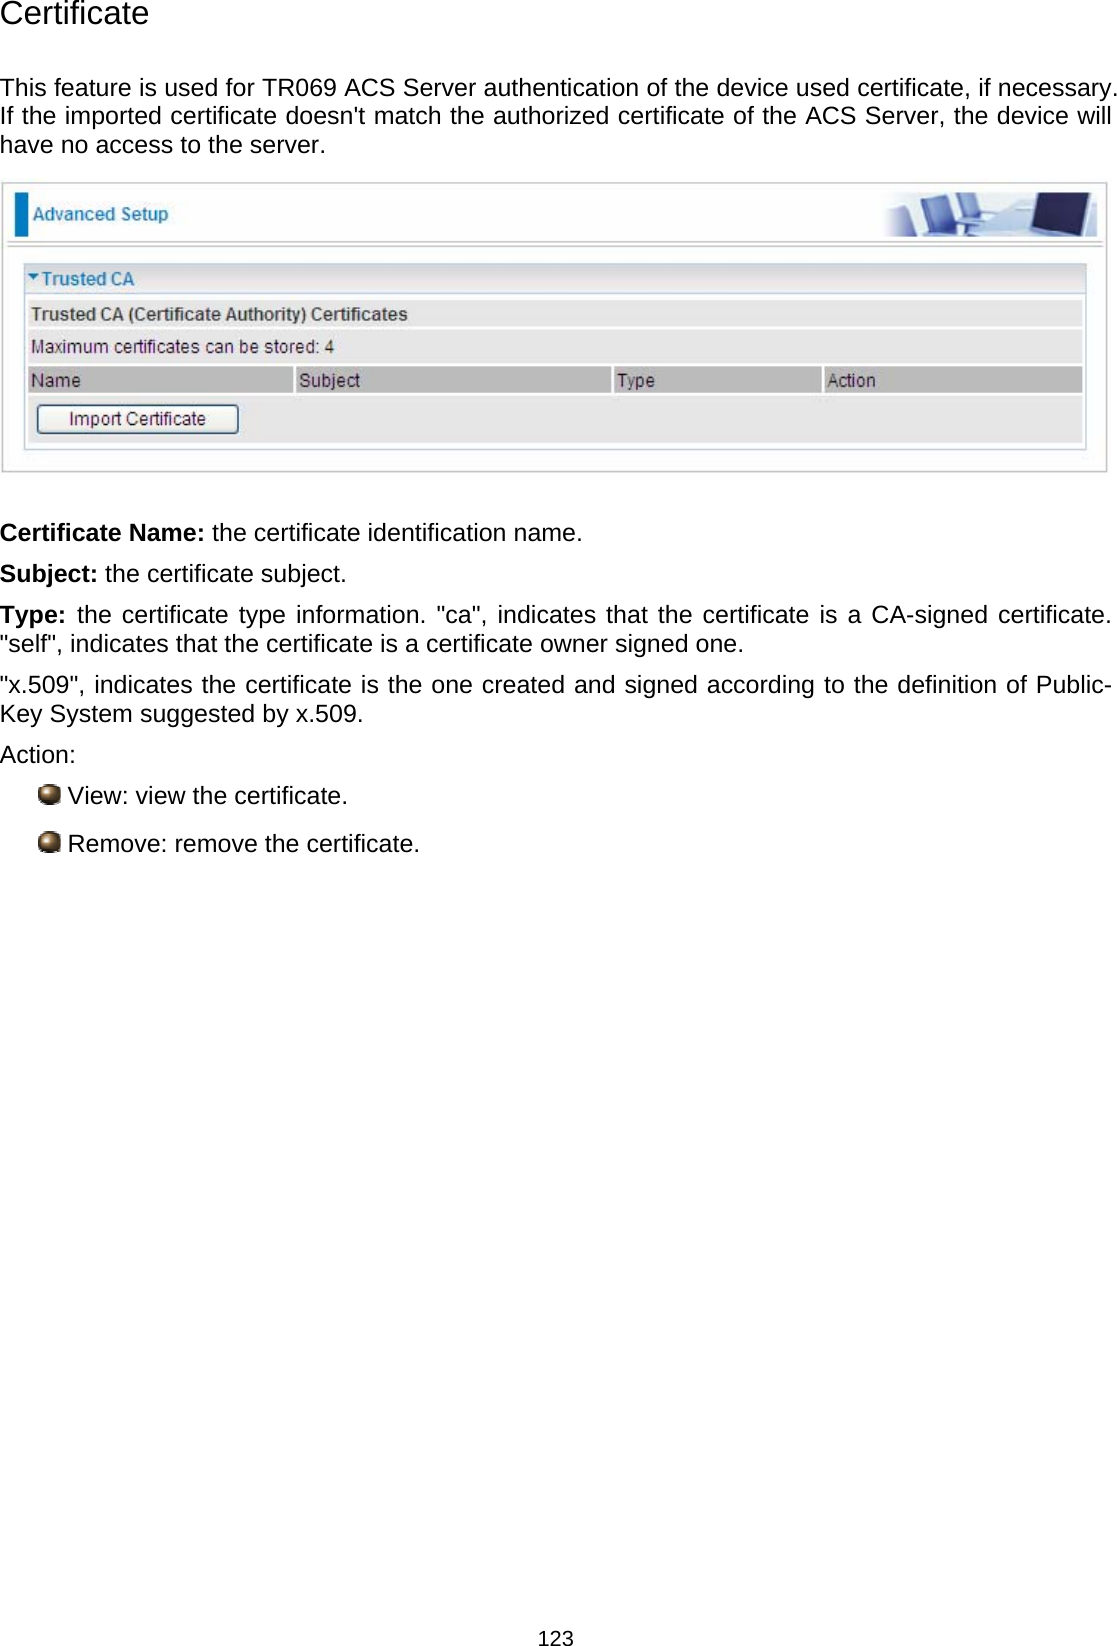  123 Certificate  This feature is used for TR069 ACS Server authentication of the device used certificate, if necessary. If the imported certificate doesn&apos;t match the authorized certificate of the ACS Server, the device will have no access to the server.   Certificate Name: the certificate identification name. Subject: the certificate subject. Type: the certificate type information. &quot;ca&quot;, indicates that the certificate is a CA-signed certificate. &quot;self&quot;, indicates that the certificate is a certificate owner signed one. &quot;x.509&quot;, indicates the certificate is the one created and signed according to the definition of Public-Key System suggested by x.509. Action:  View: view the certificate.  Remove: remove the certificate.            